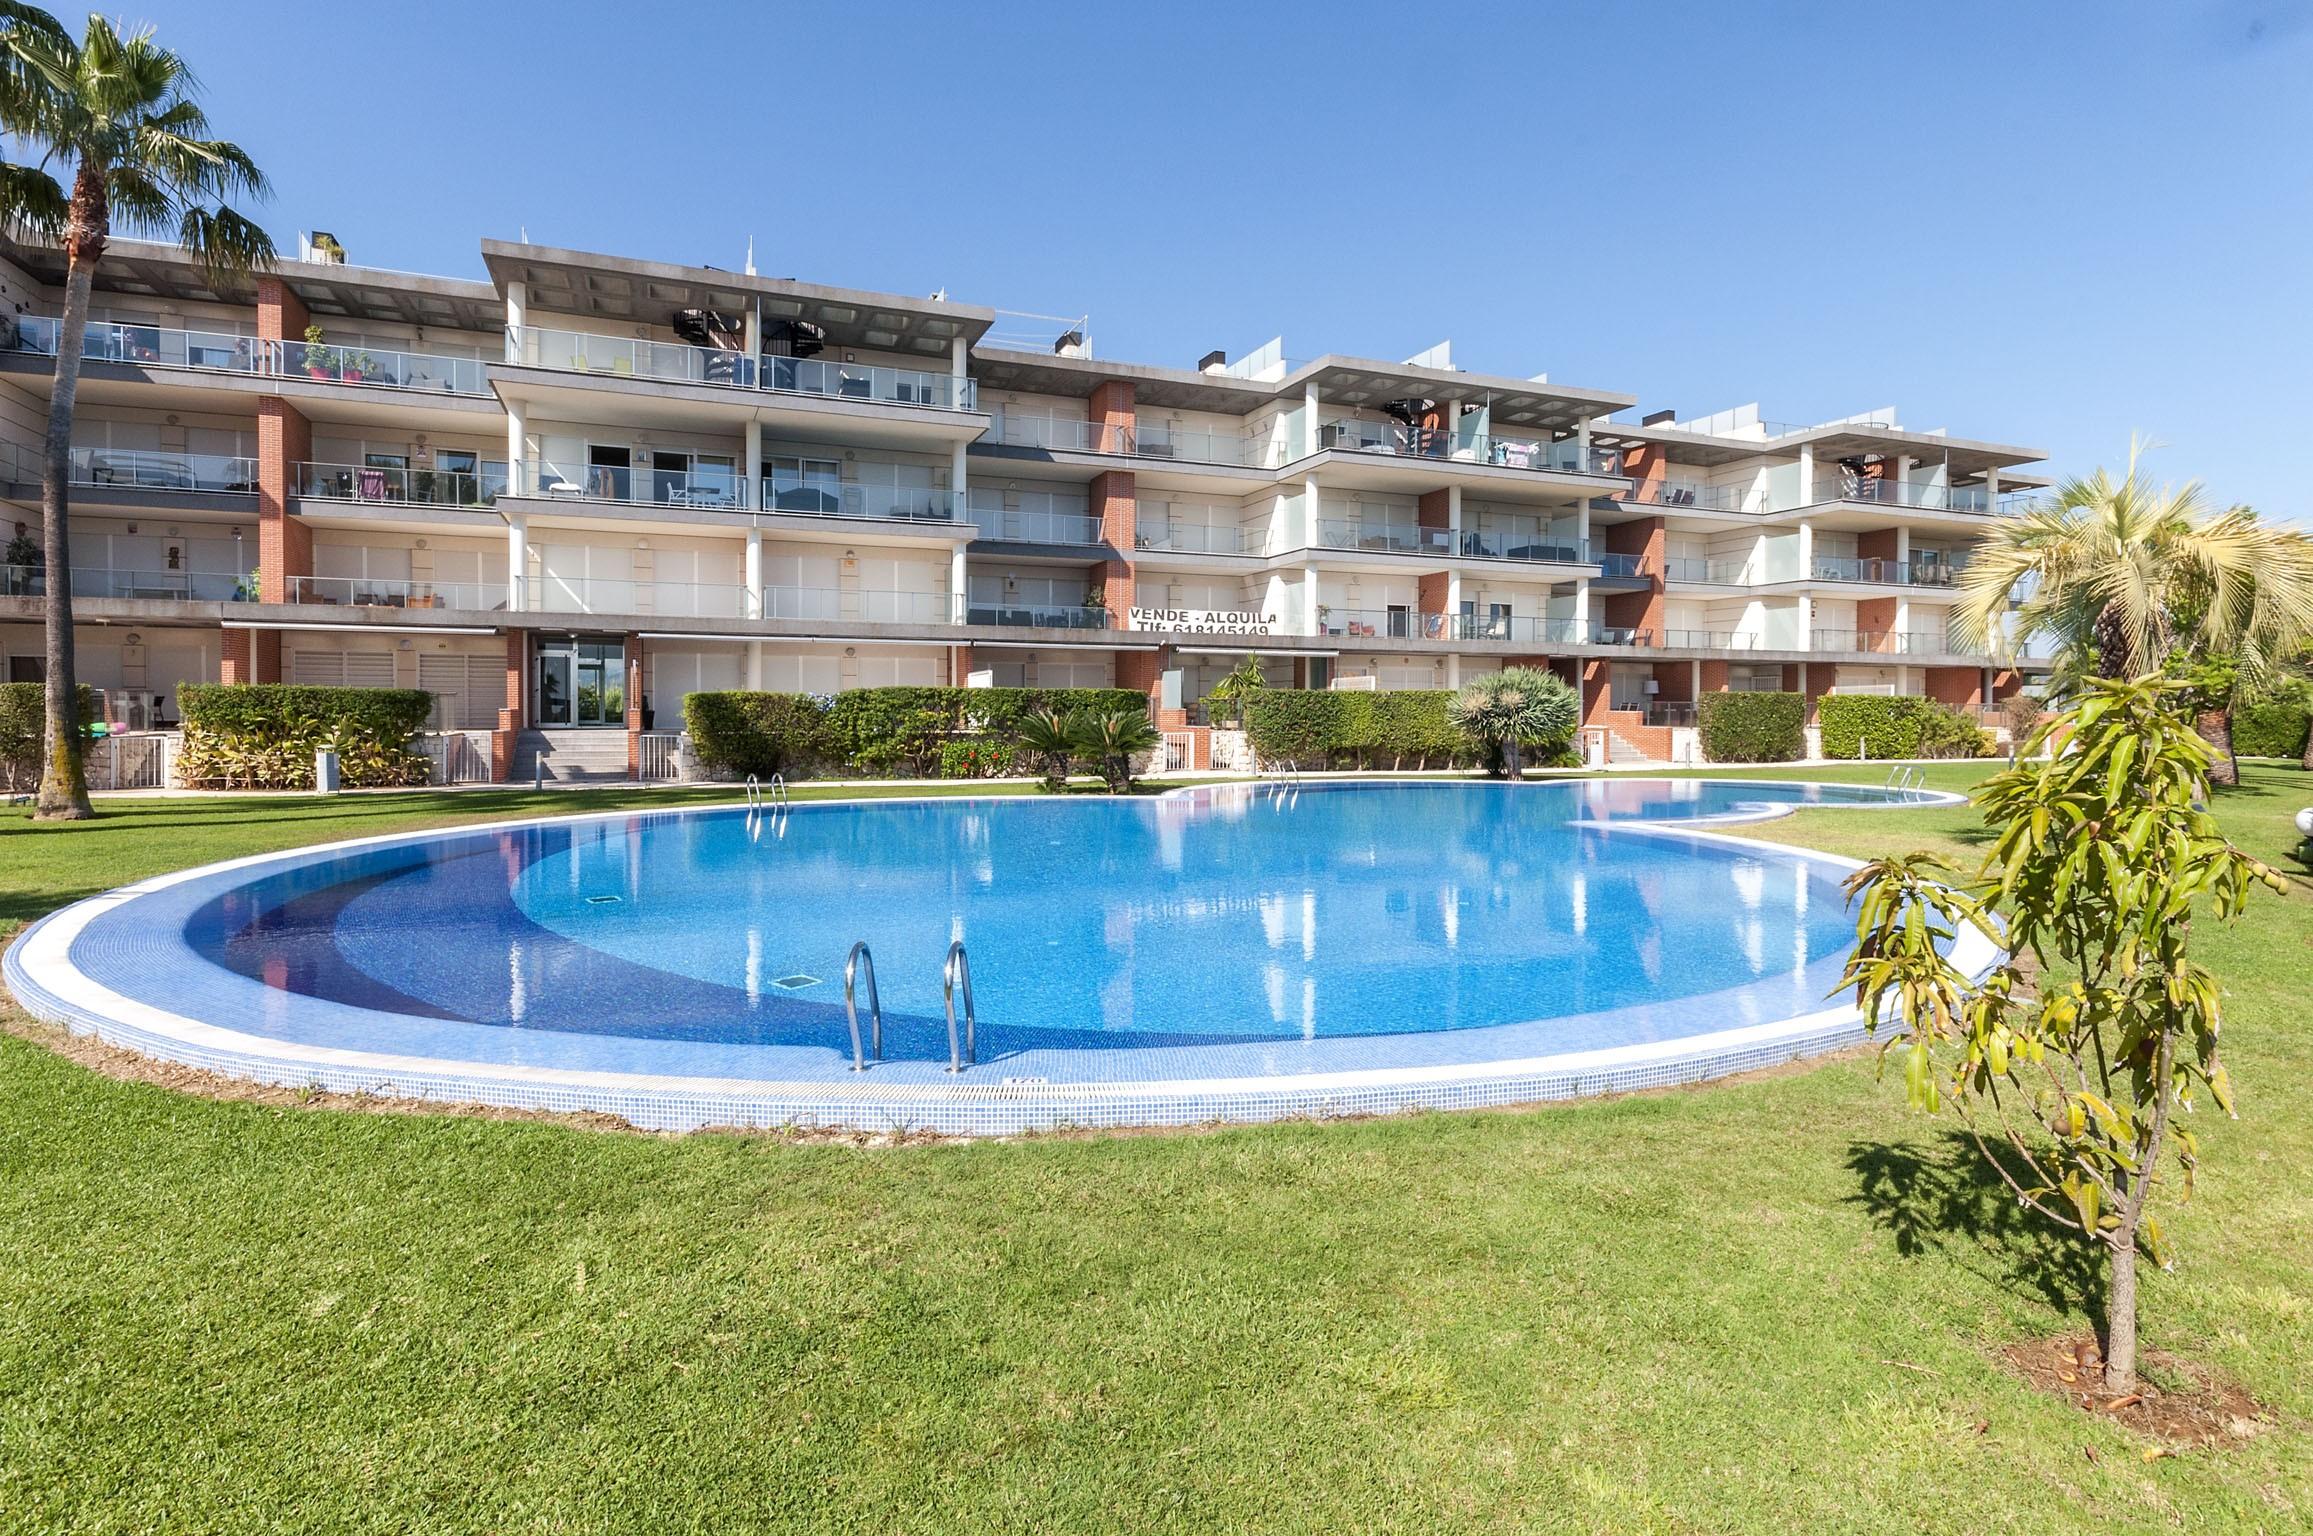 Property Image 2 - AIRE - Apartment with shared pool in Oliva Nova. Free WiFi